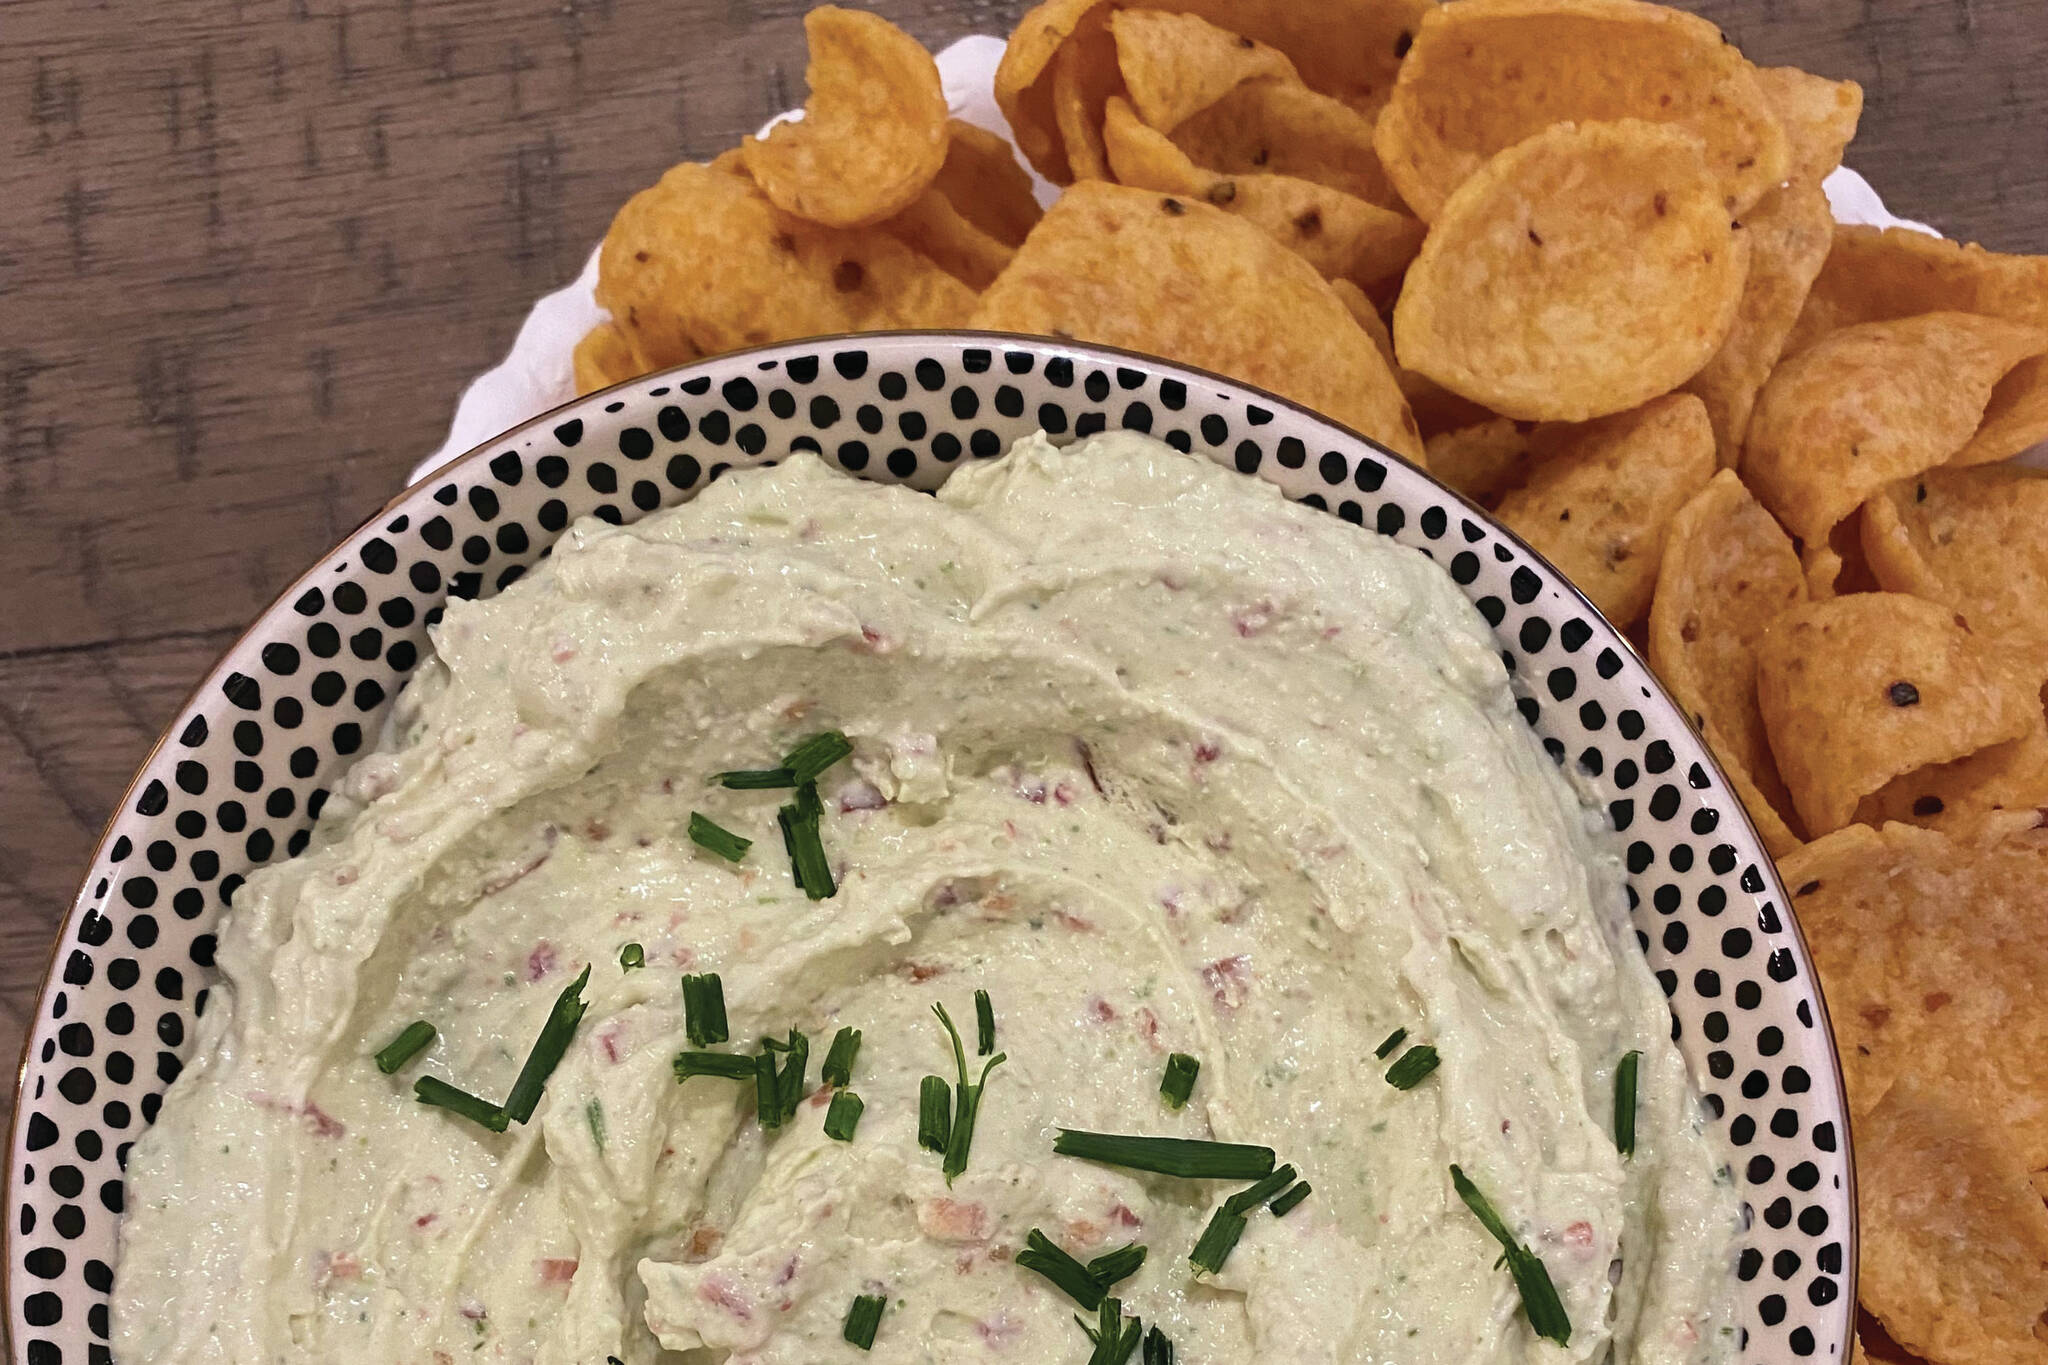 This jalapeno popper dip will brighten up any spread with subtle spice. (Photo by Tressa Dale/Peninsula Clarion)